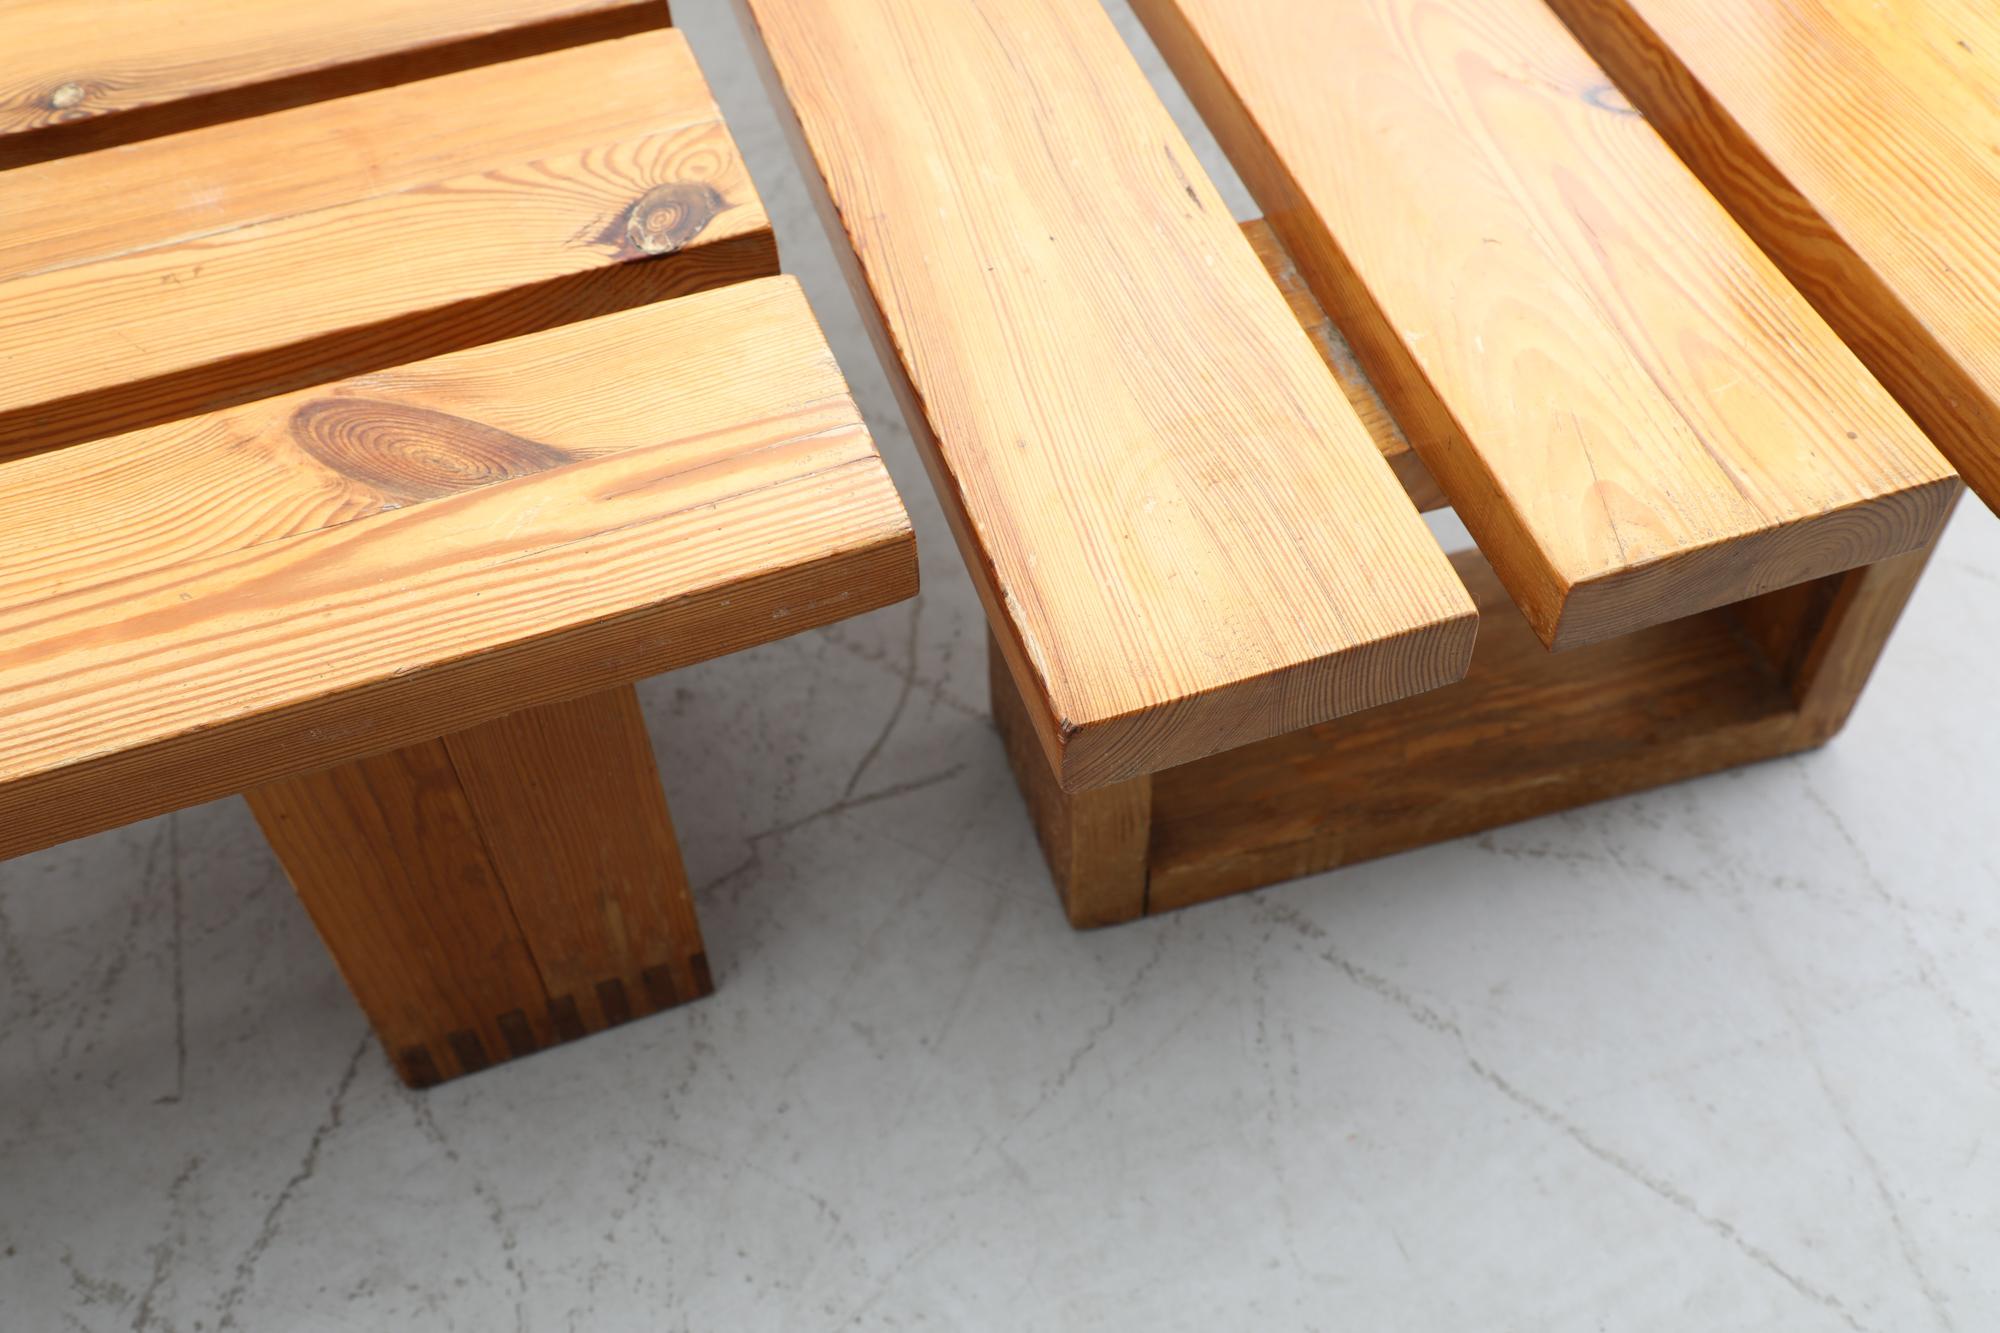 Ate van Apeldoorn Heavy Pine Slat Benches w/ Square Legs & Box Joints For Sale 4